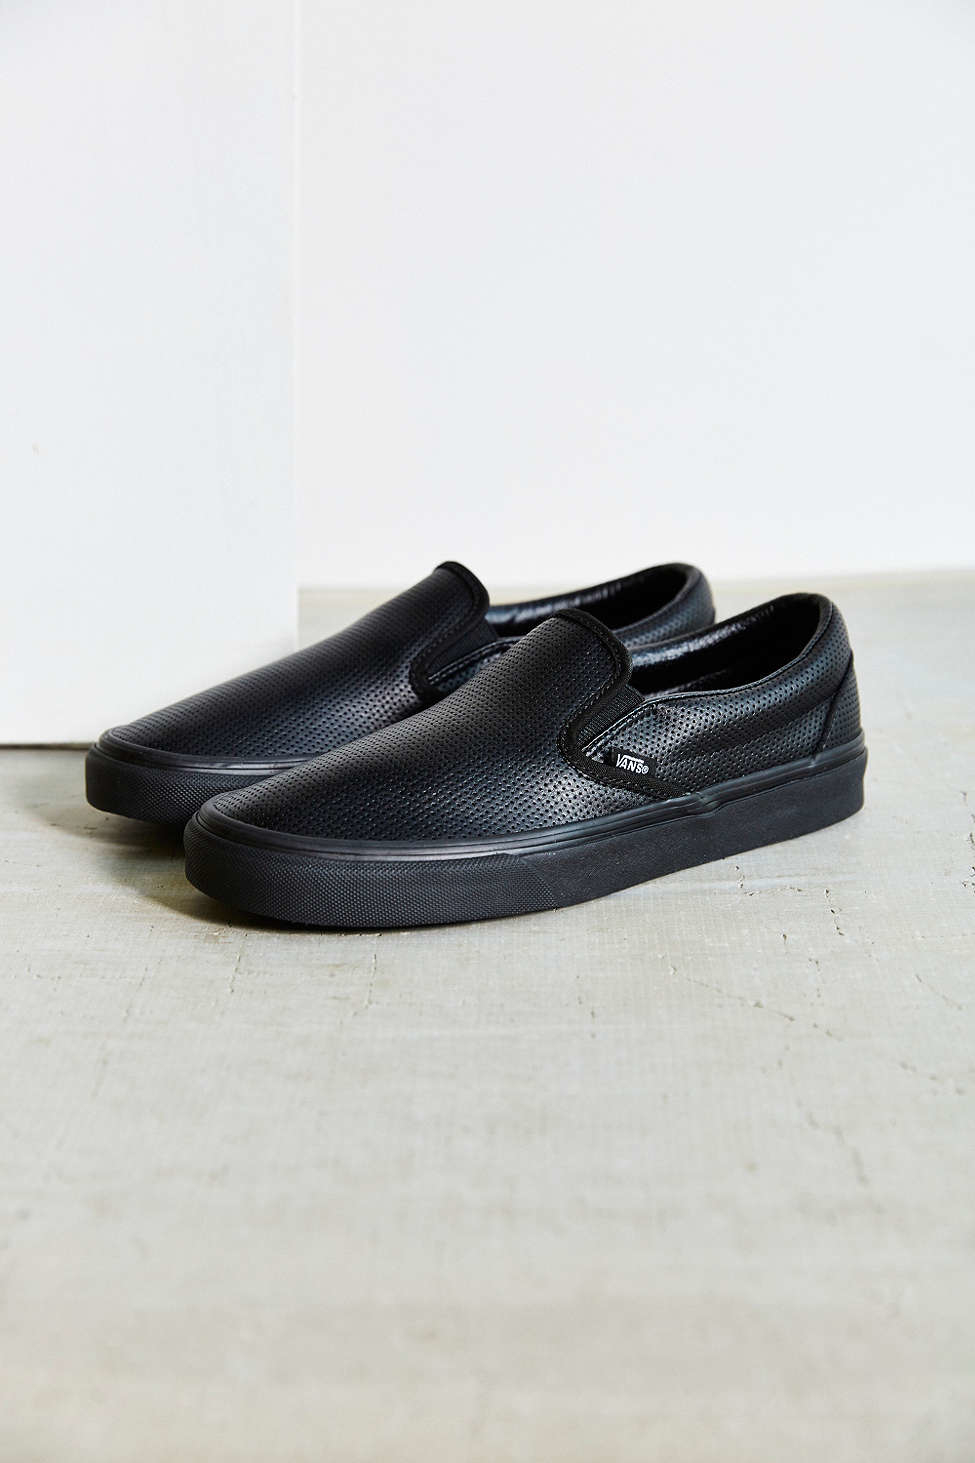 Vans Perforated Leather Classic Slip-on Shoe in Black | Lyst